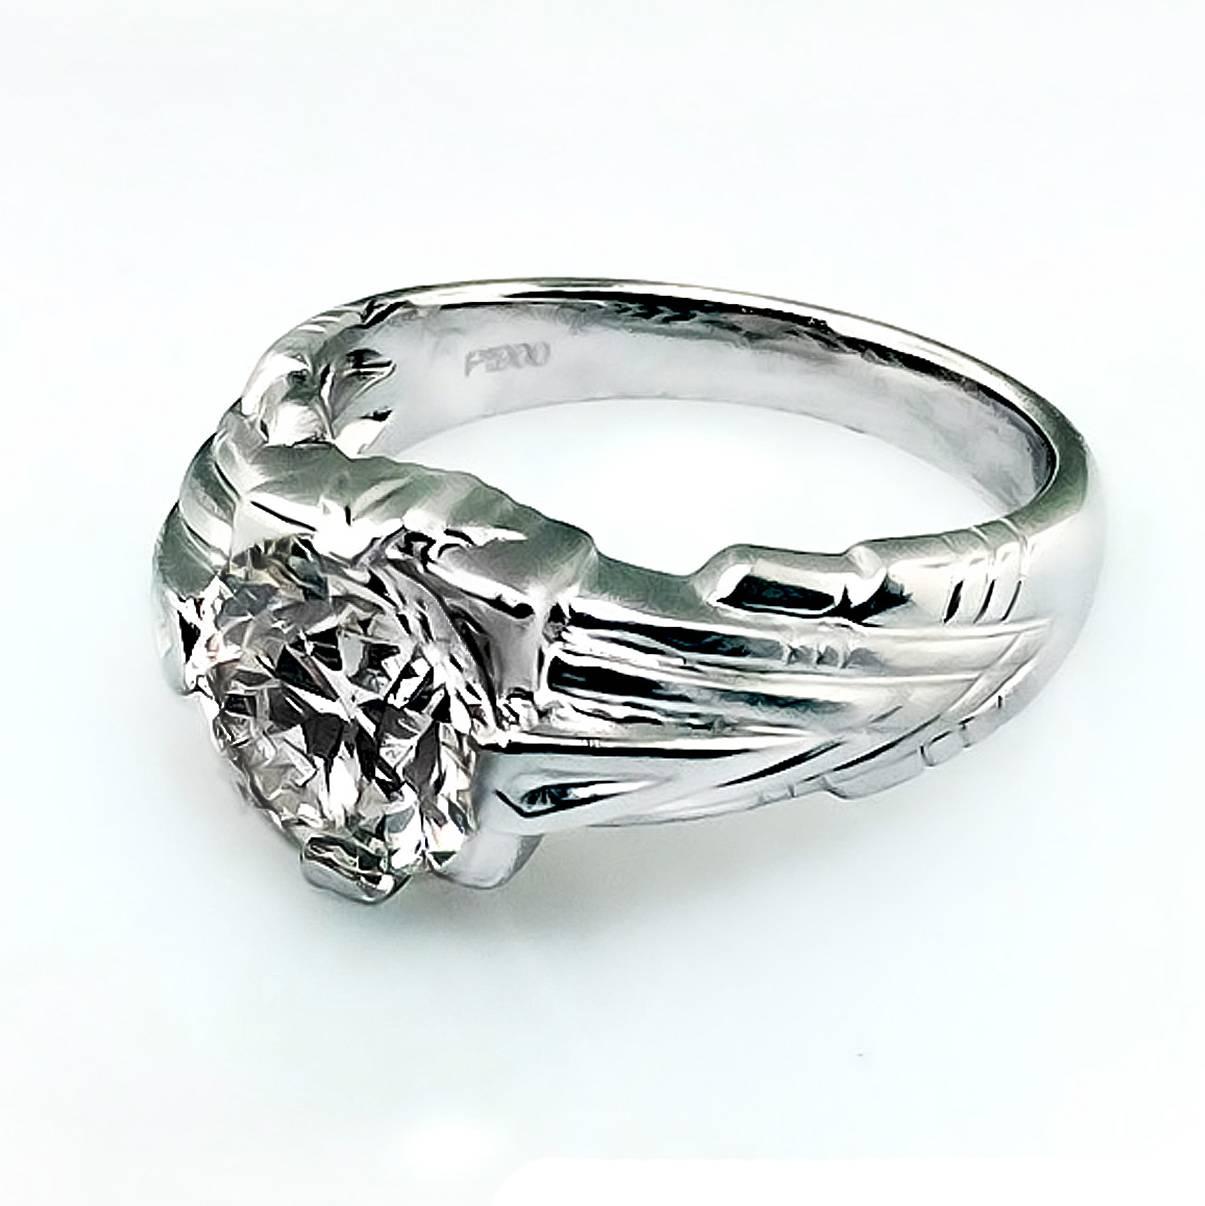 Platinum engagement ring designed by JCK Award Winner Jonathan Duran, of Santa Fe, New Mexico. This one-of-a-kind gorgeous platinum ring is set with a 2.76 carat, brilliant cut round diamond O color VS2 clarity.

 Notice the extra intricate